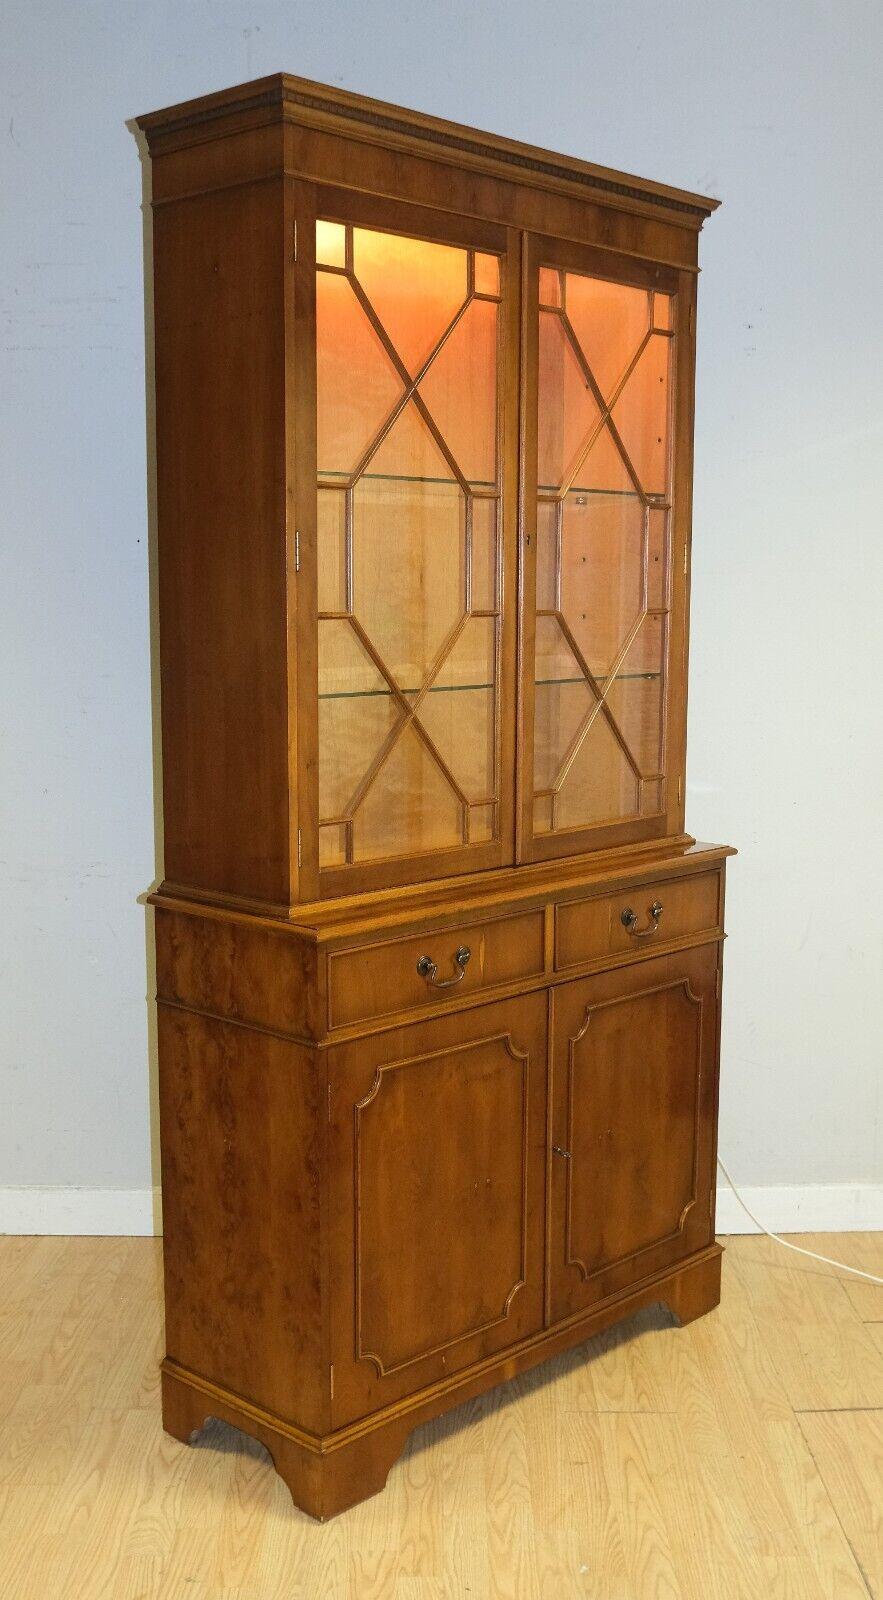 wooden display cabinet with glass doors and lights